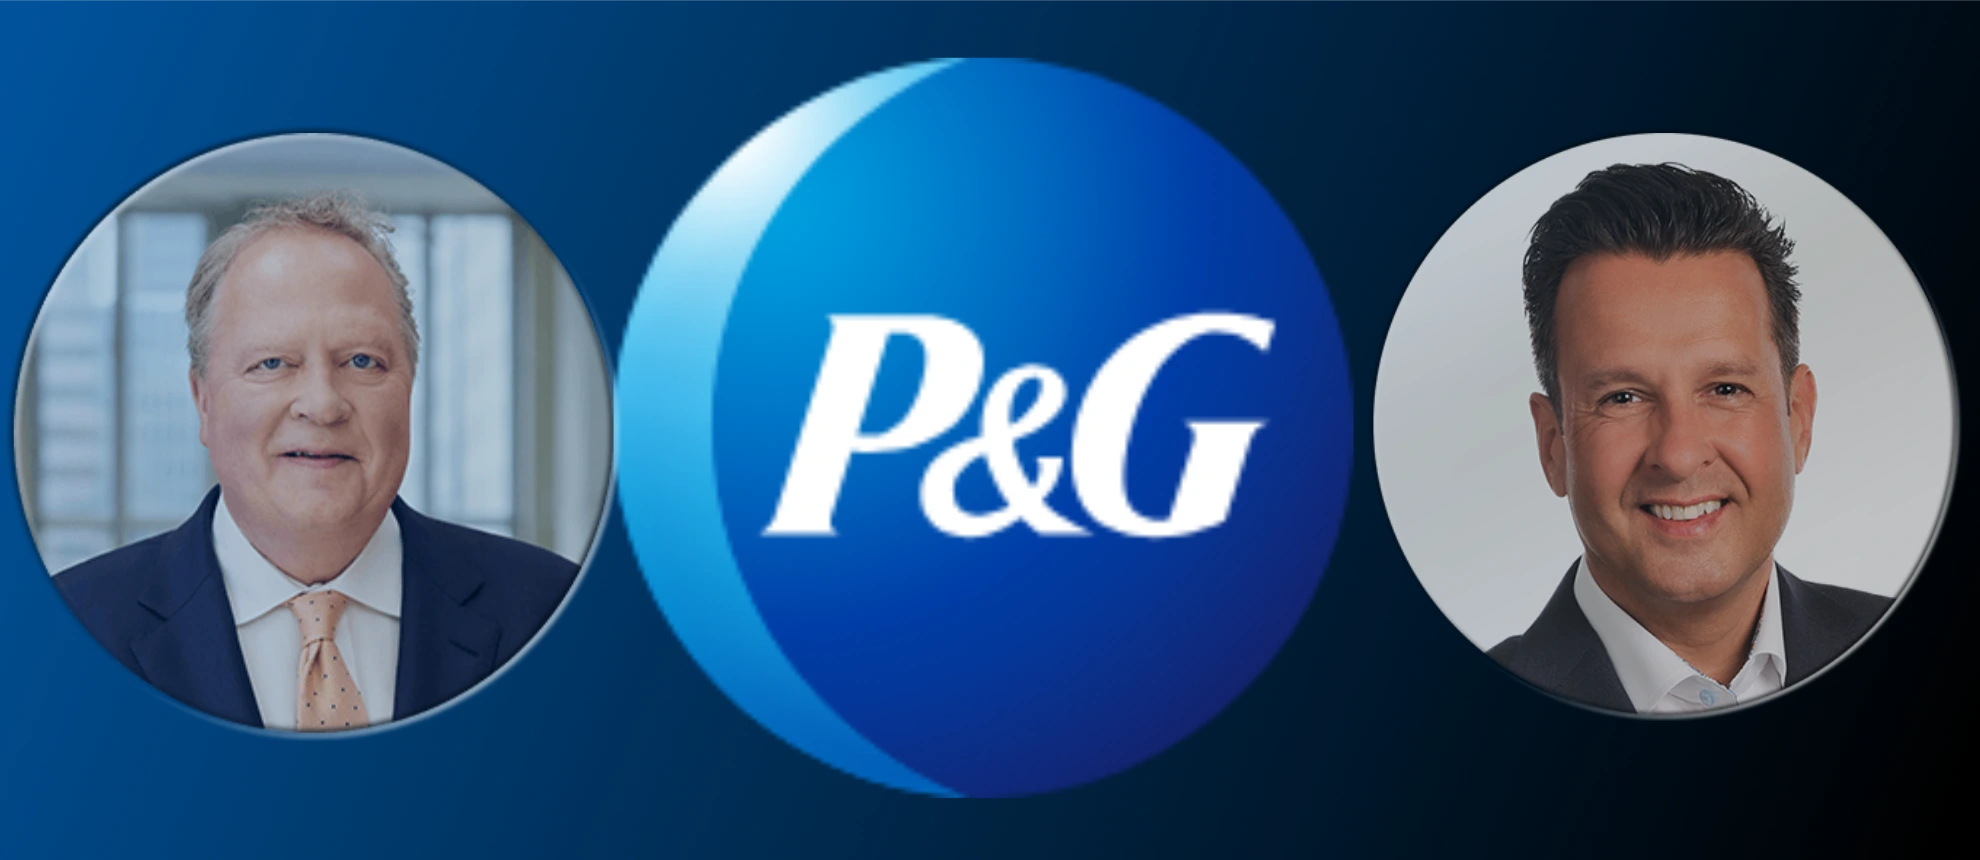 P&G Executive Leadership is continuing to invest in their media ecosystem